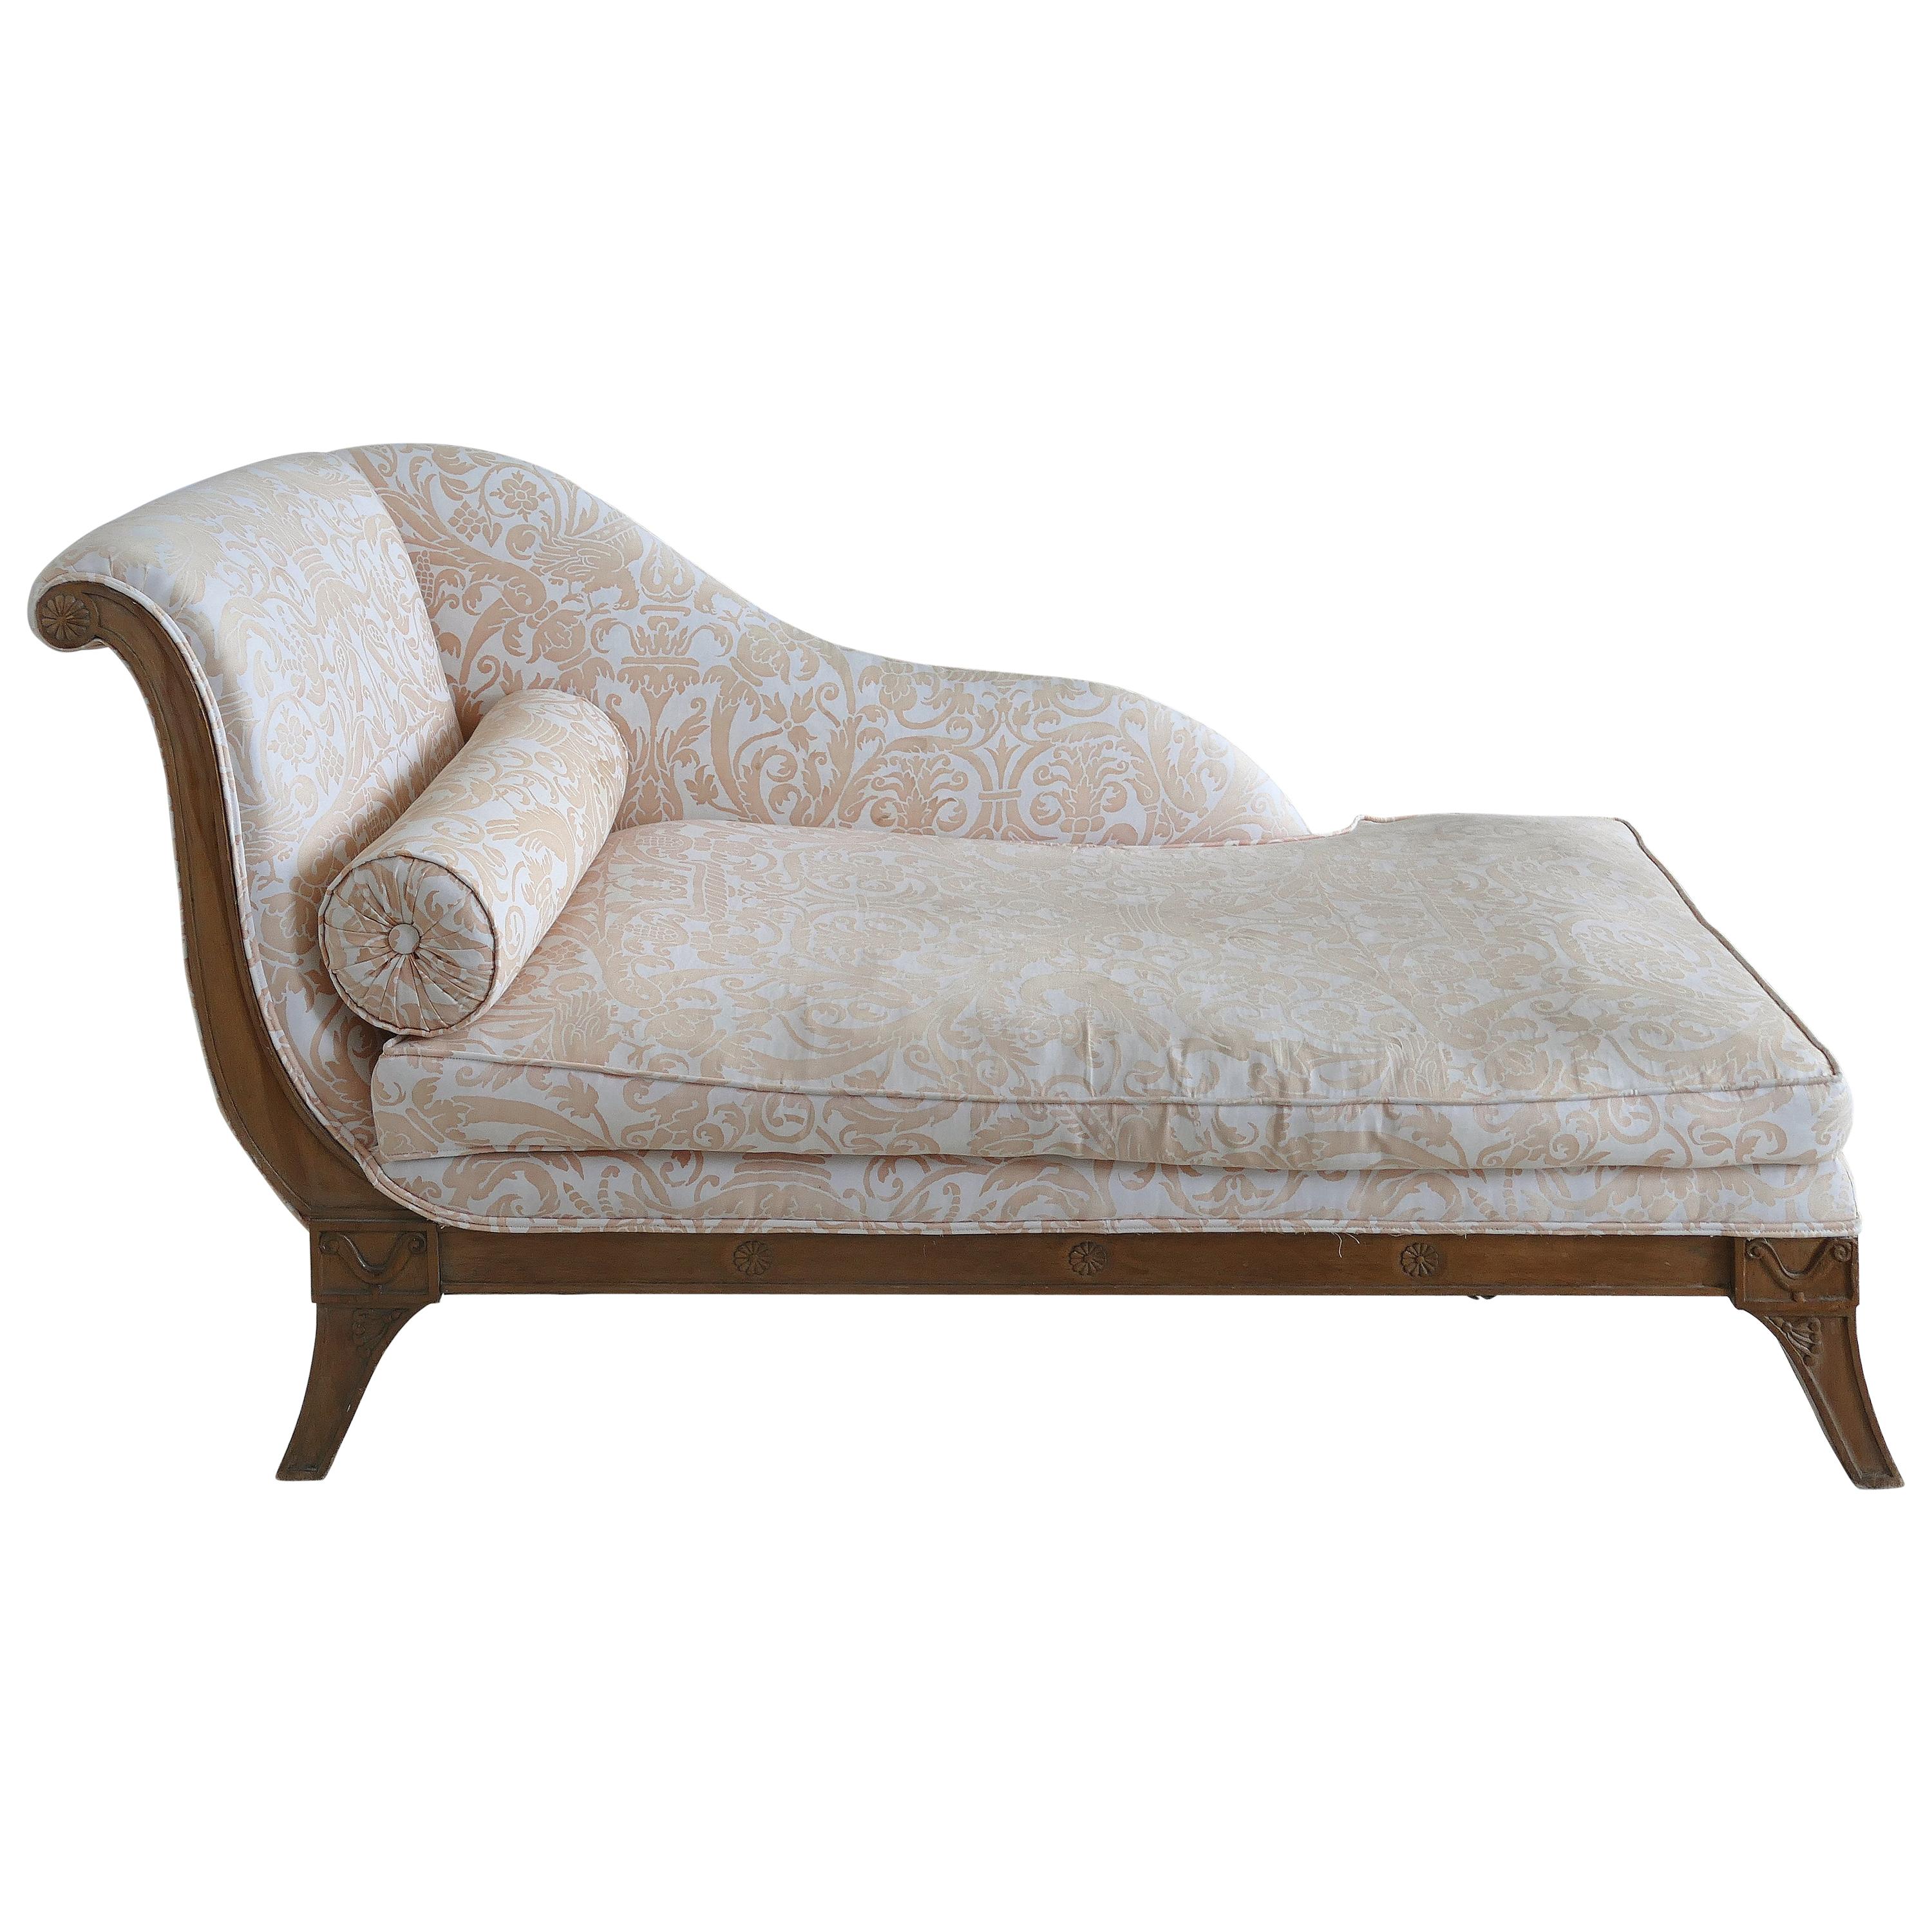 Antique Chaise Lounge Upholstered in Fortuny Fabric with a Carved Wood  Frame For Sale at 1stDibs